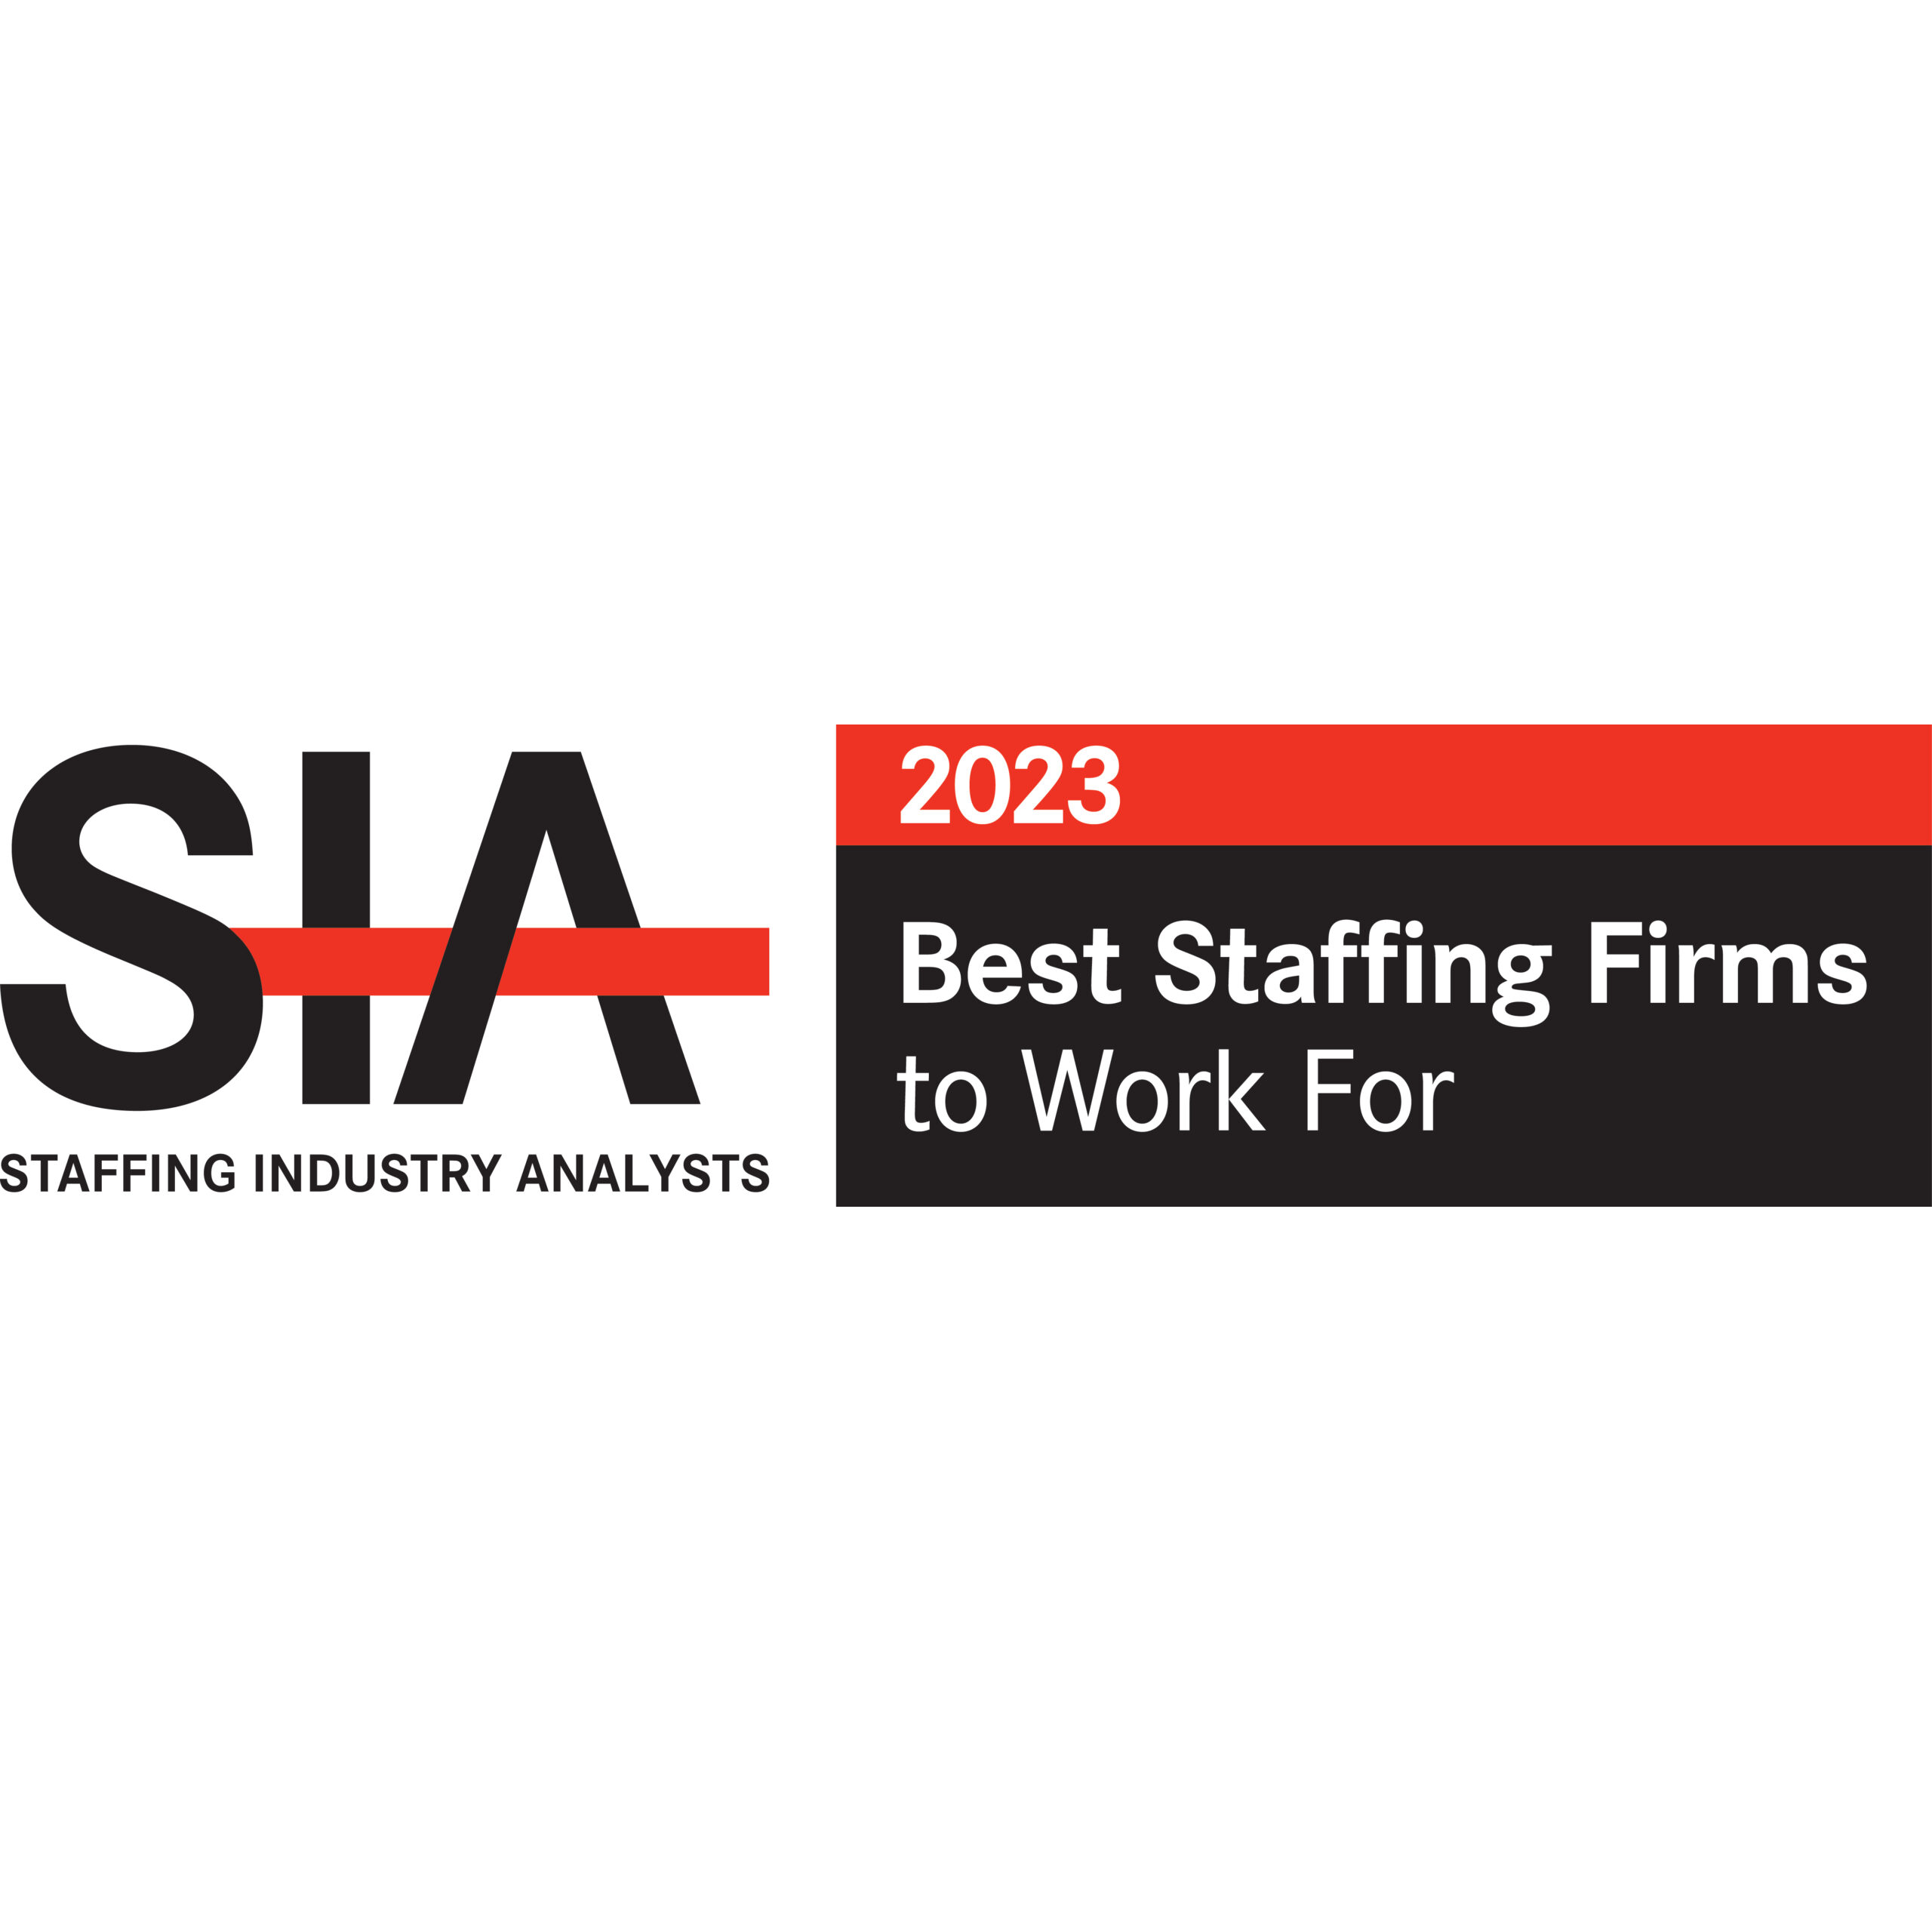 SIA Best Staffing Firms to Work For